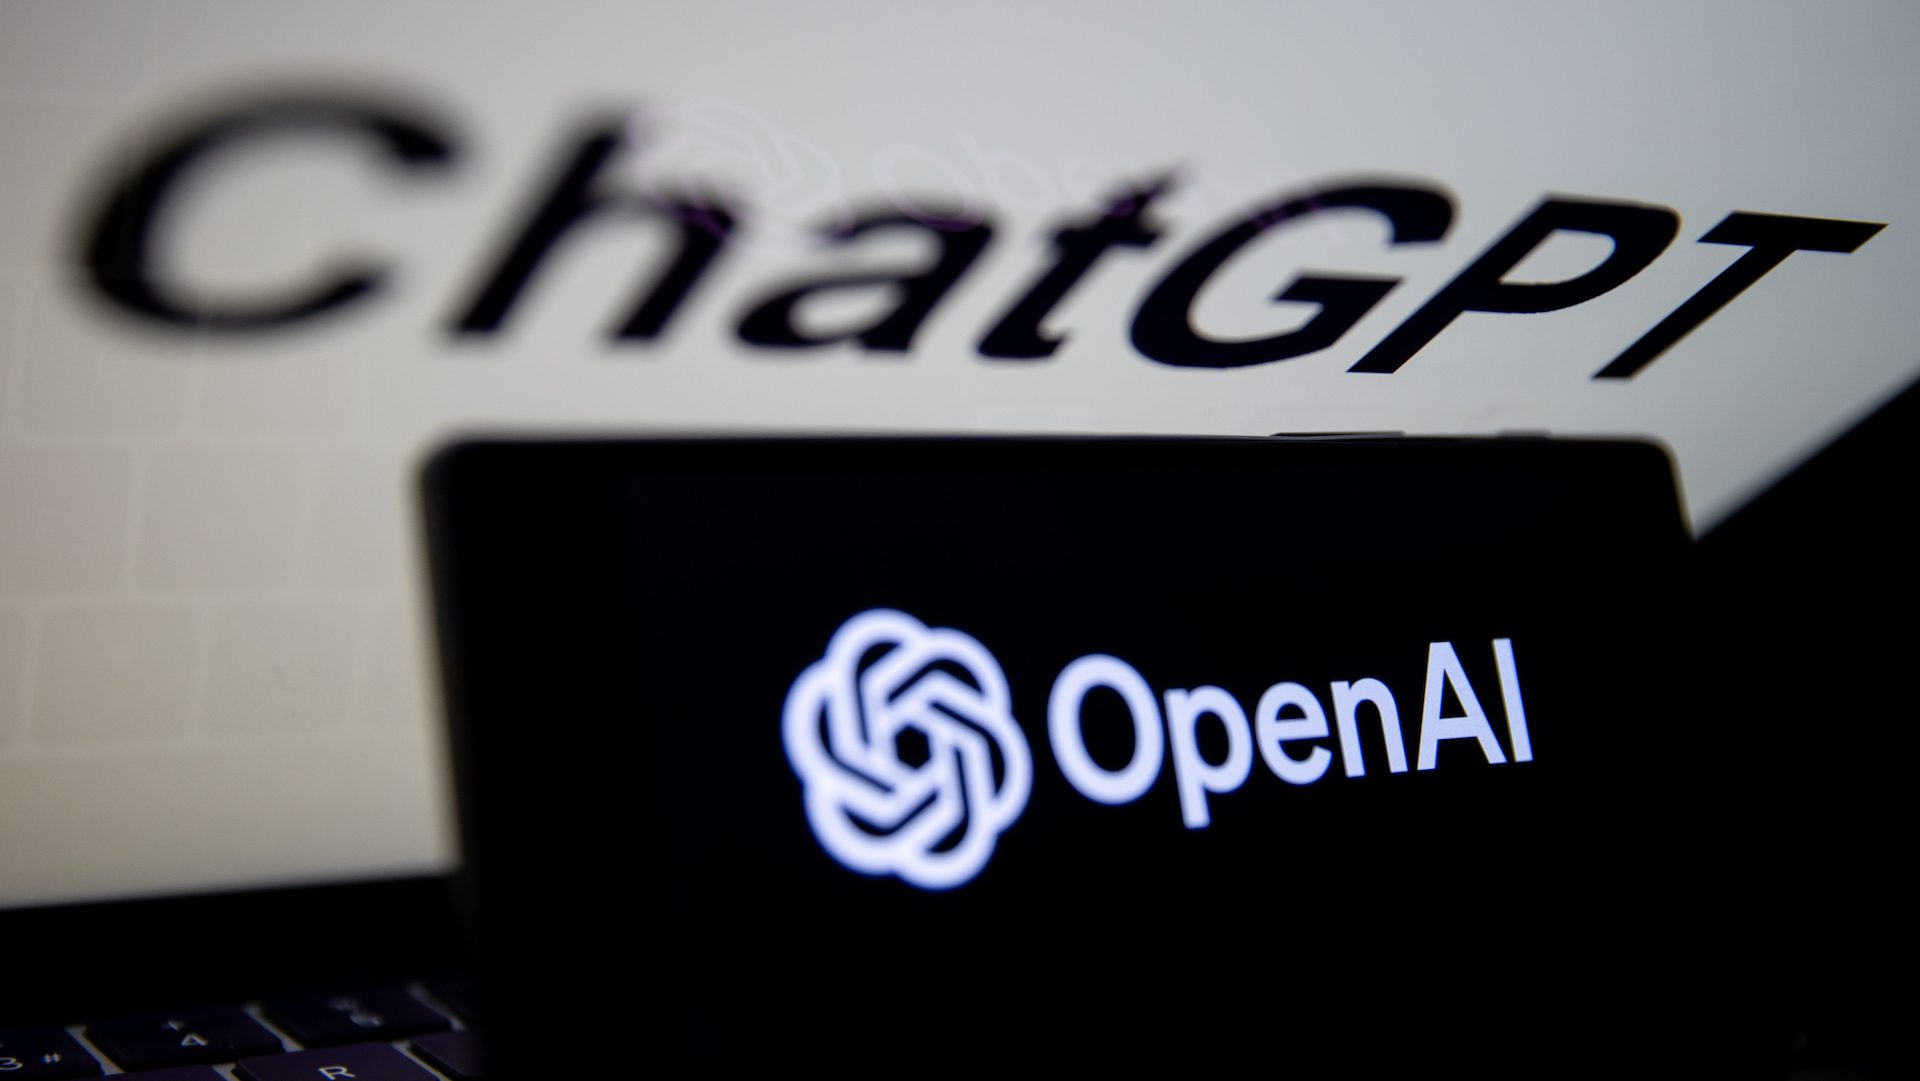 The OpenAI logo is displayed on a mobile phone screen in front of a computer screen with ChatGPT's logo